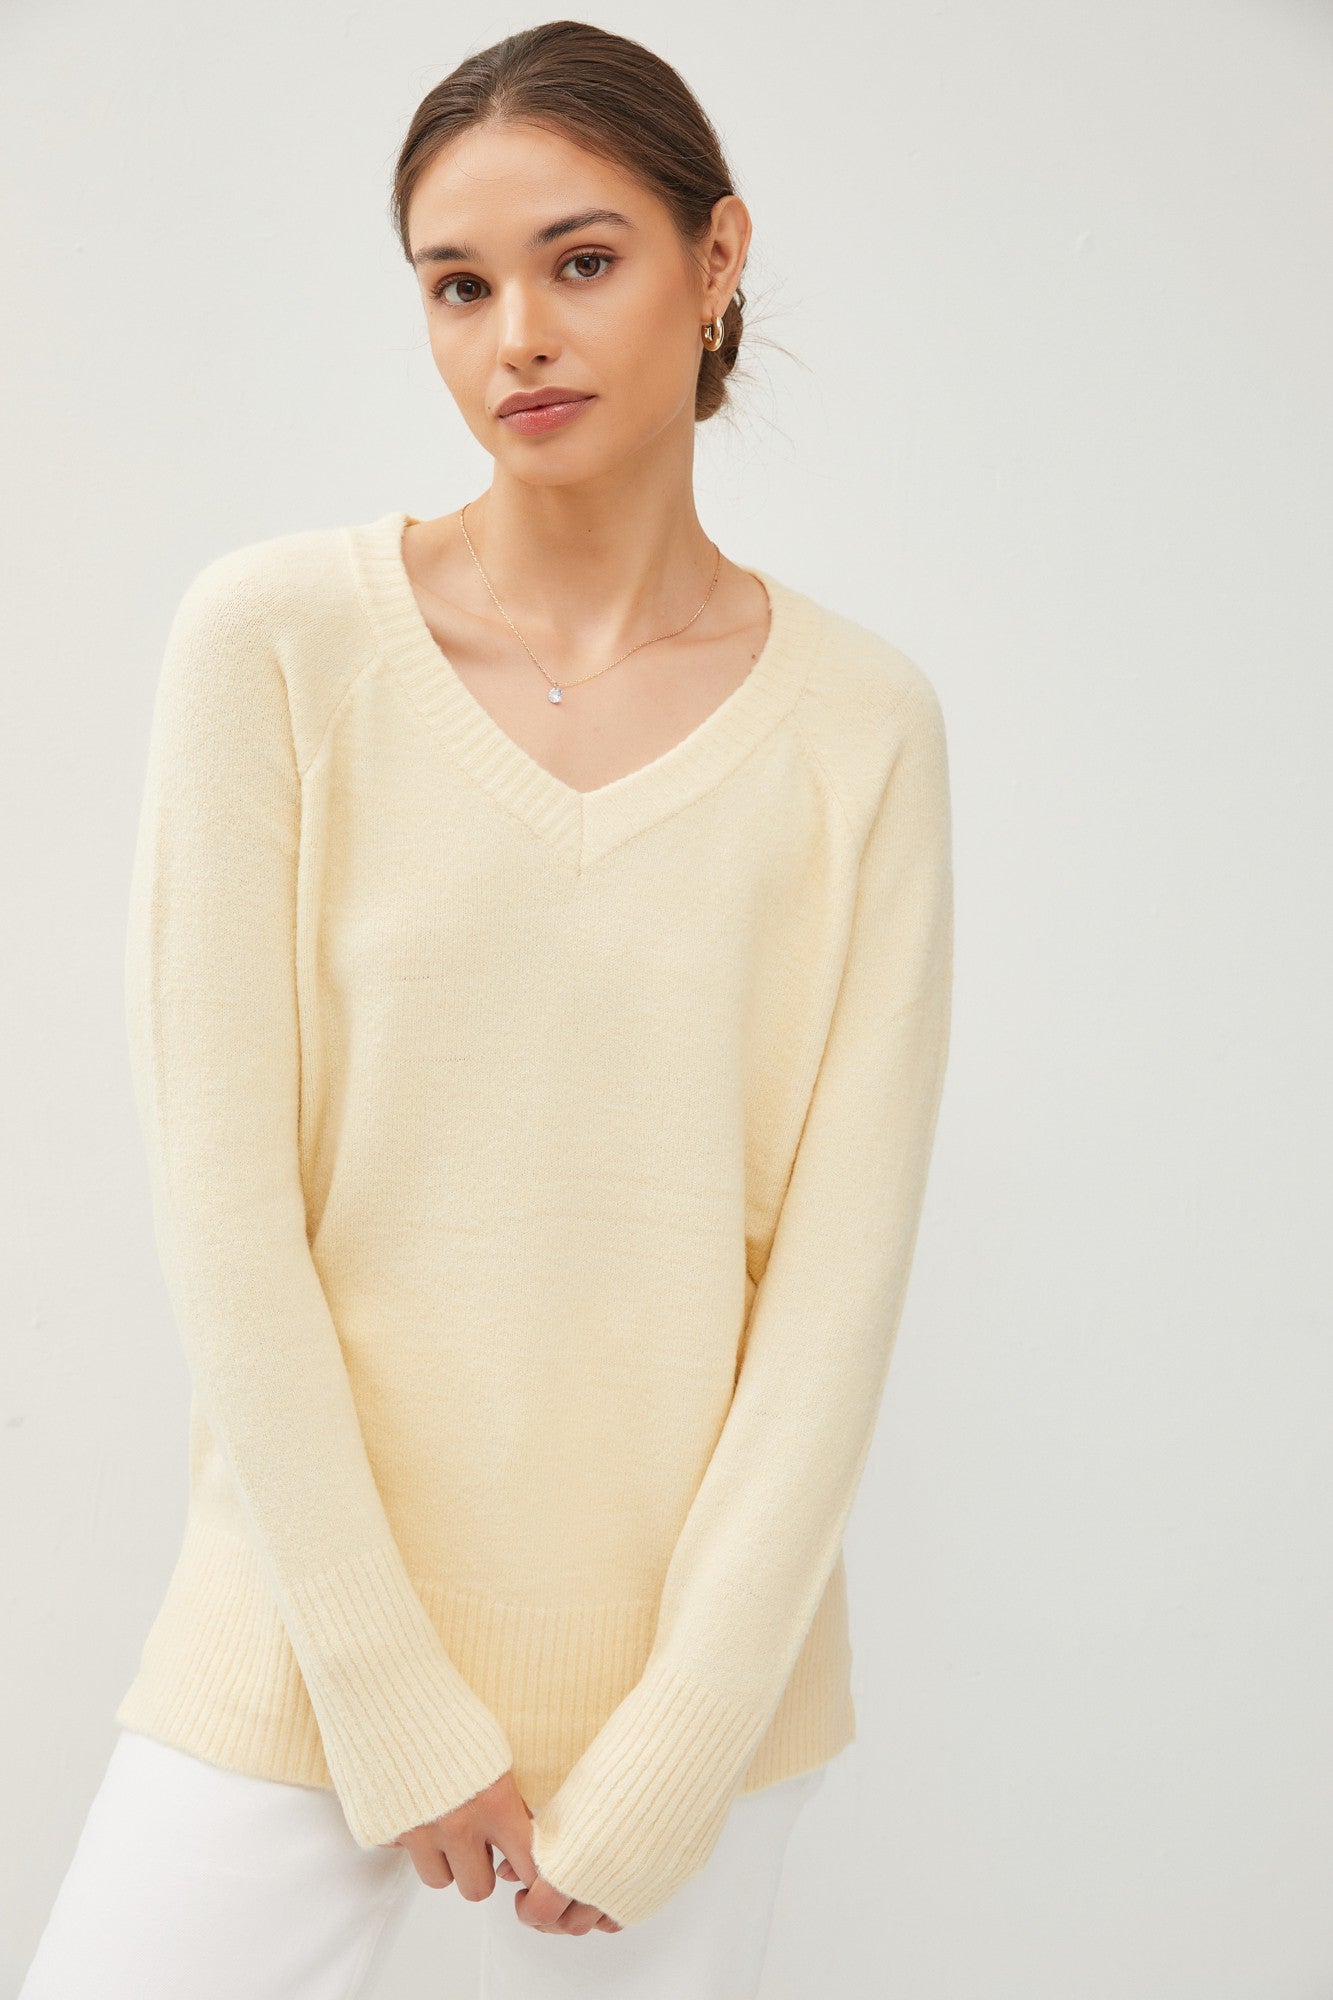 Everlee Classic V-Neck Sweater front